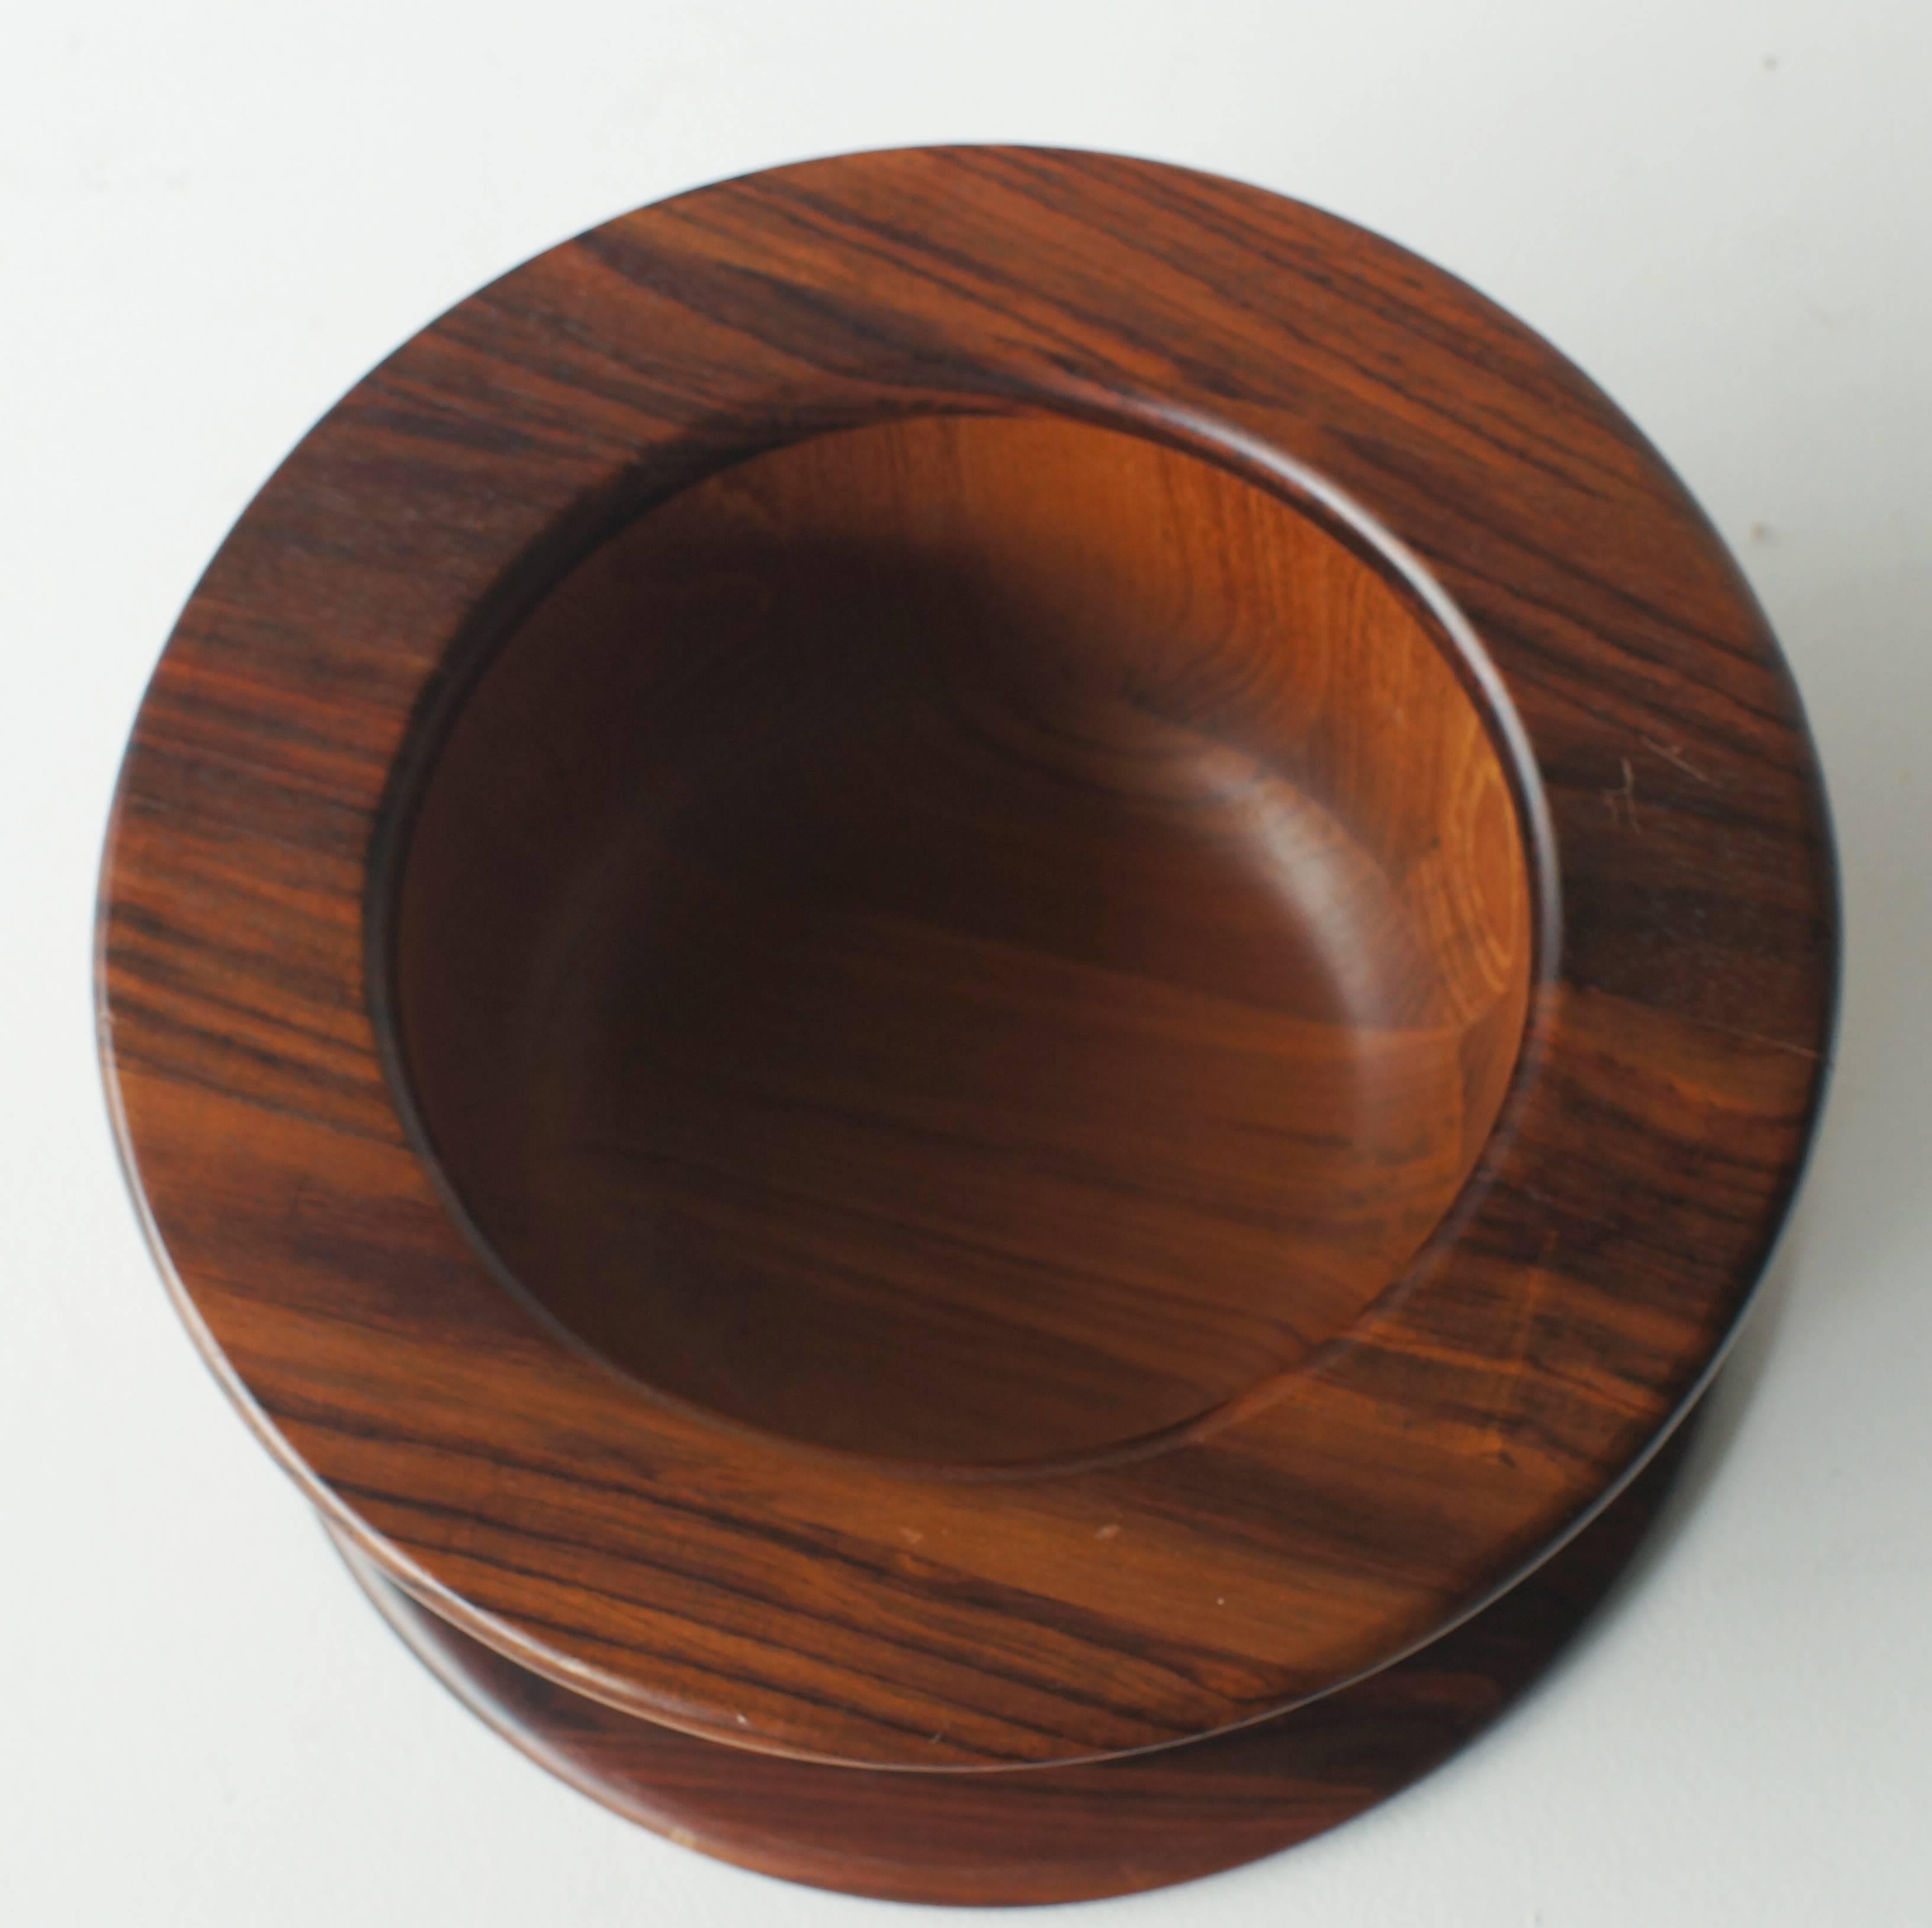 Wooden bowl by Ettore Sottsass for Malay. This bowl was produced in the late 1980s in Japan. Malay was the brand that produced small pieces like bowls or vases of Sottsass and Shiro Kuramata in Japan.